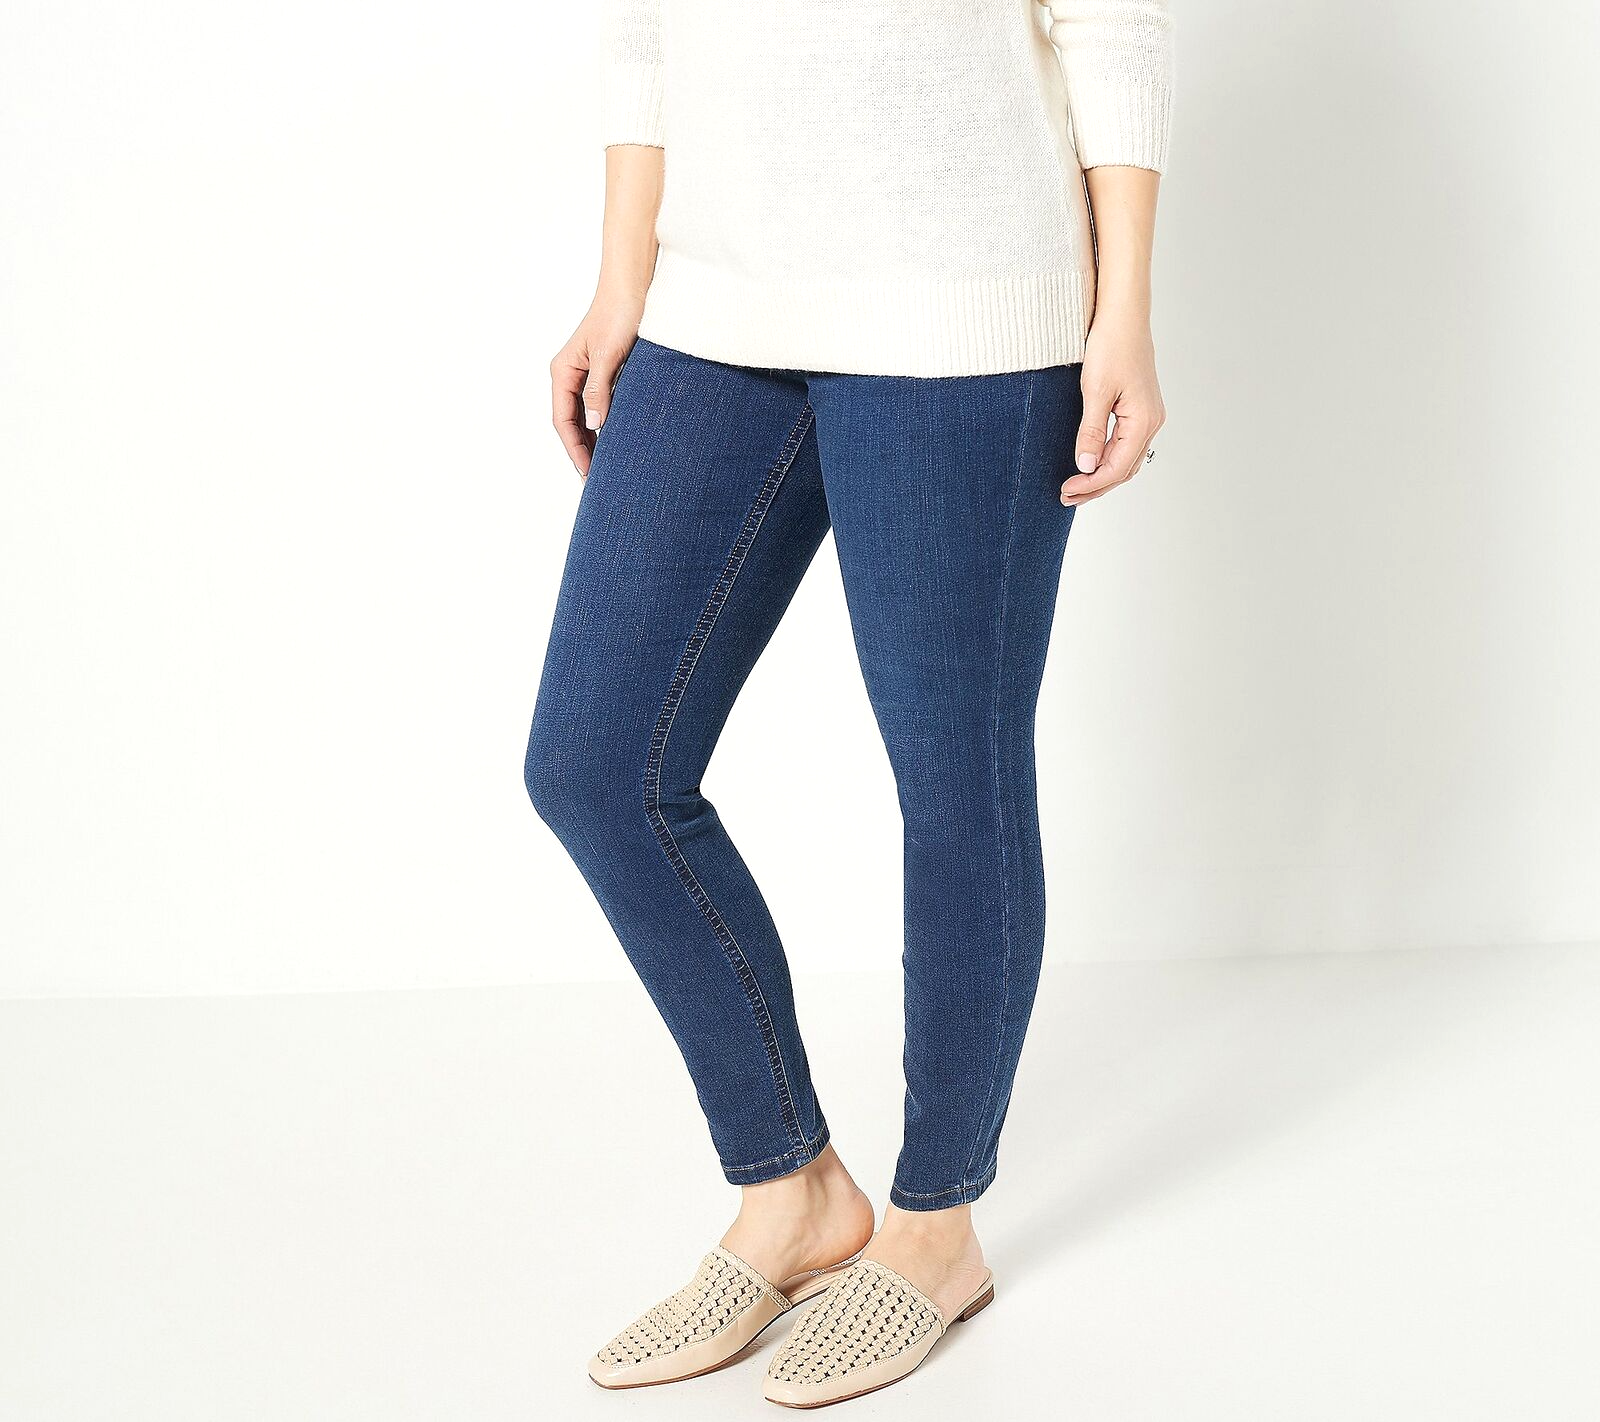 Primary image for Denim & Co. Cozy Touch Denim Pull-On Jeggings- Deep Indigo, Plus 22W